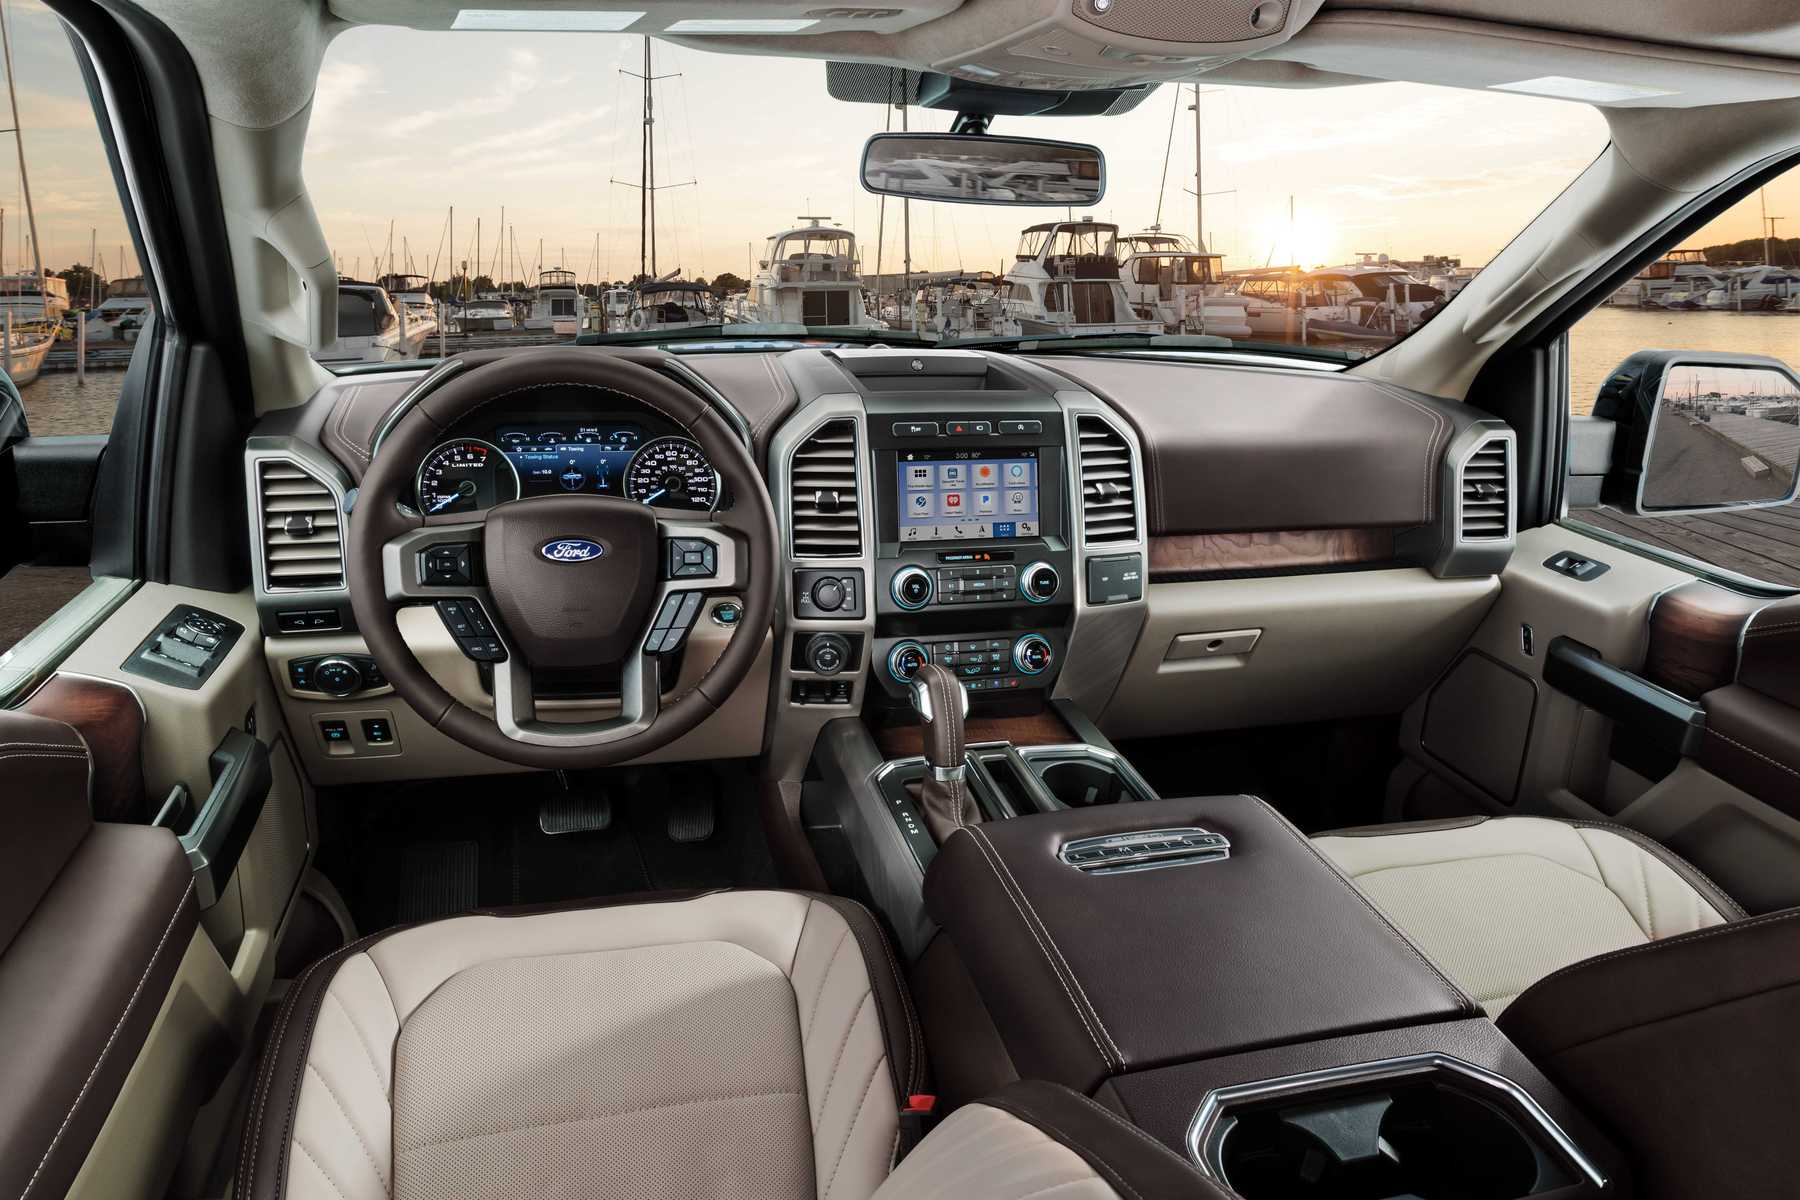 2019 Ford F 150 Pictures Specs And Price Carsxa